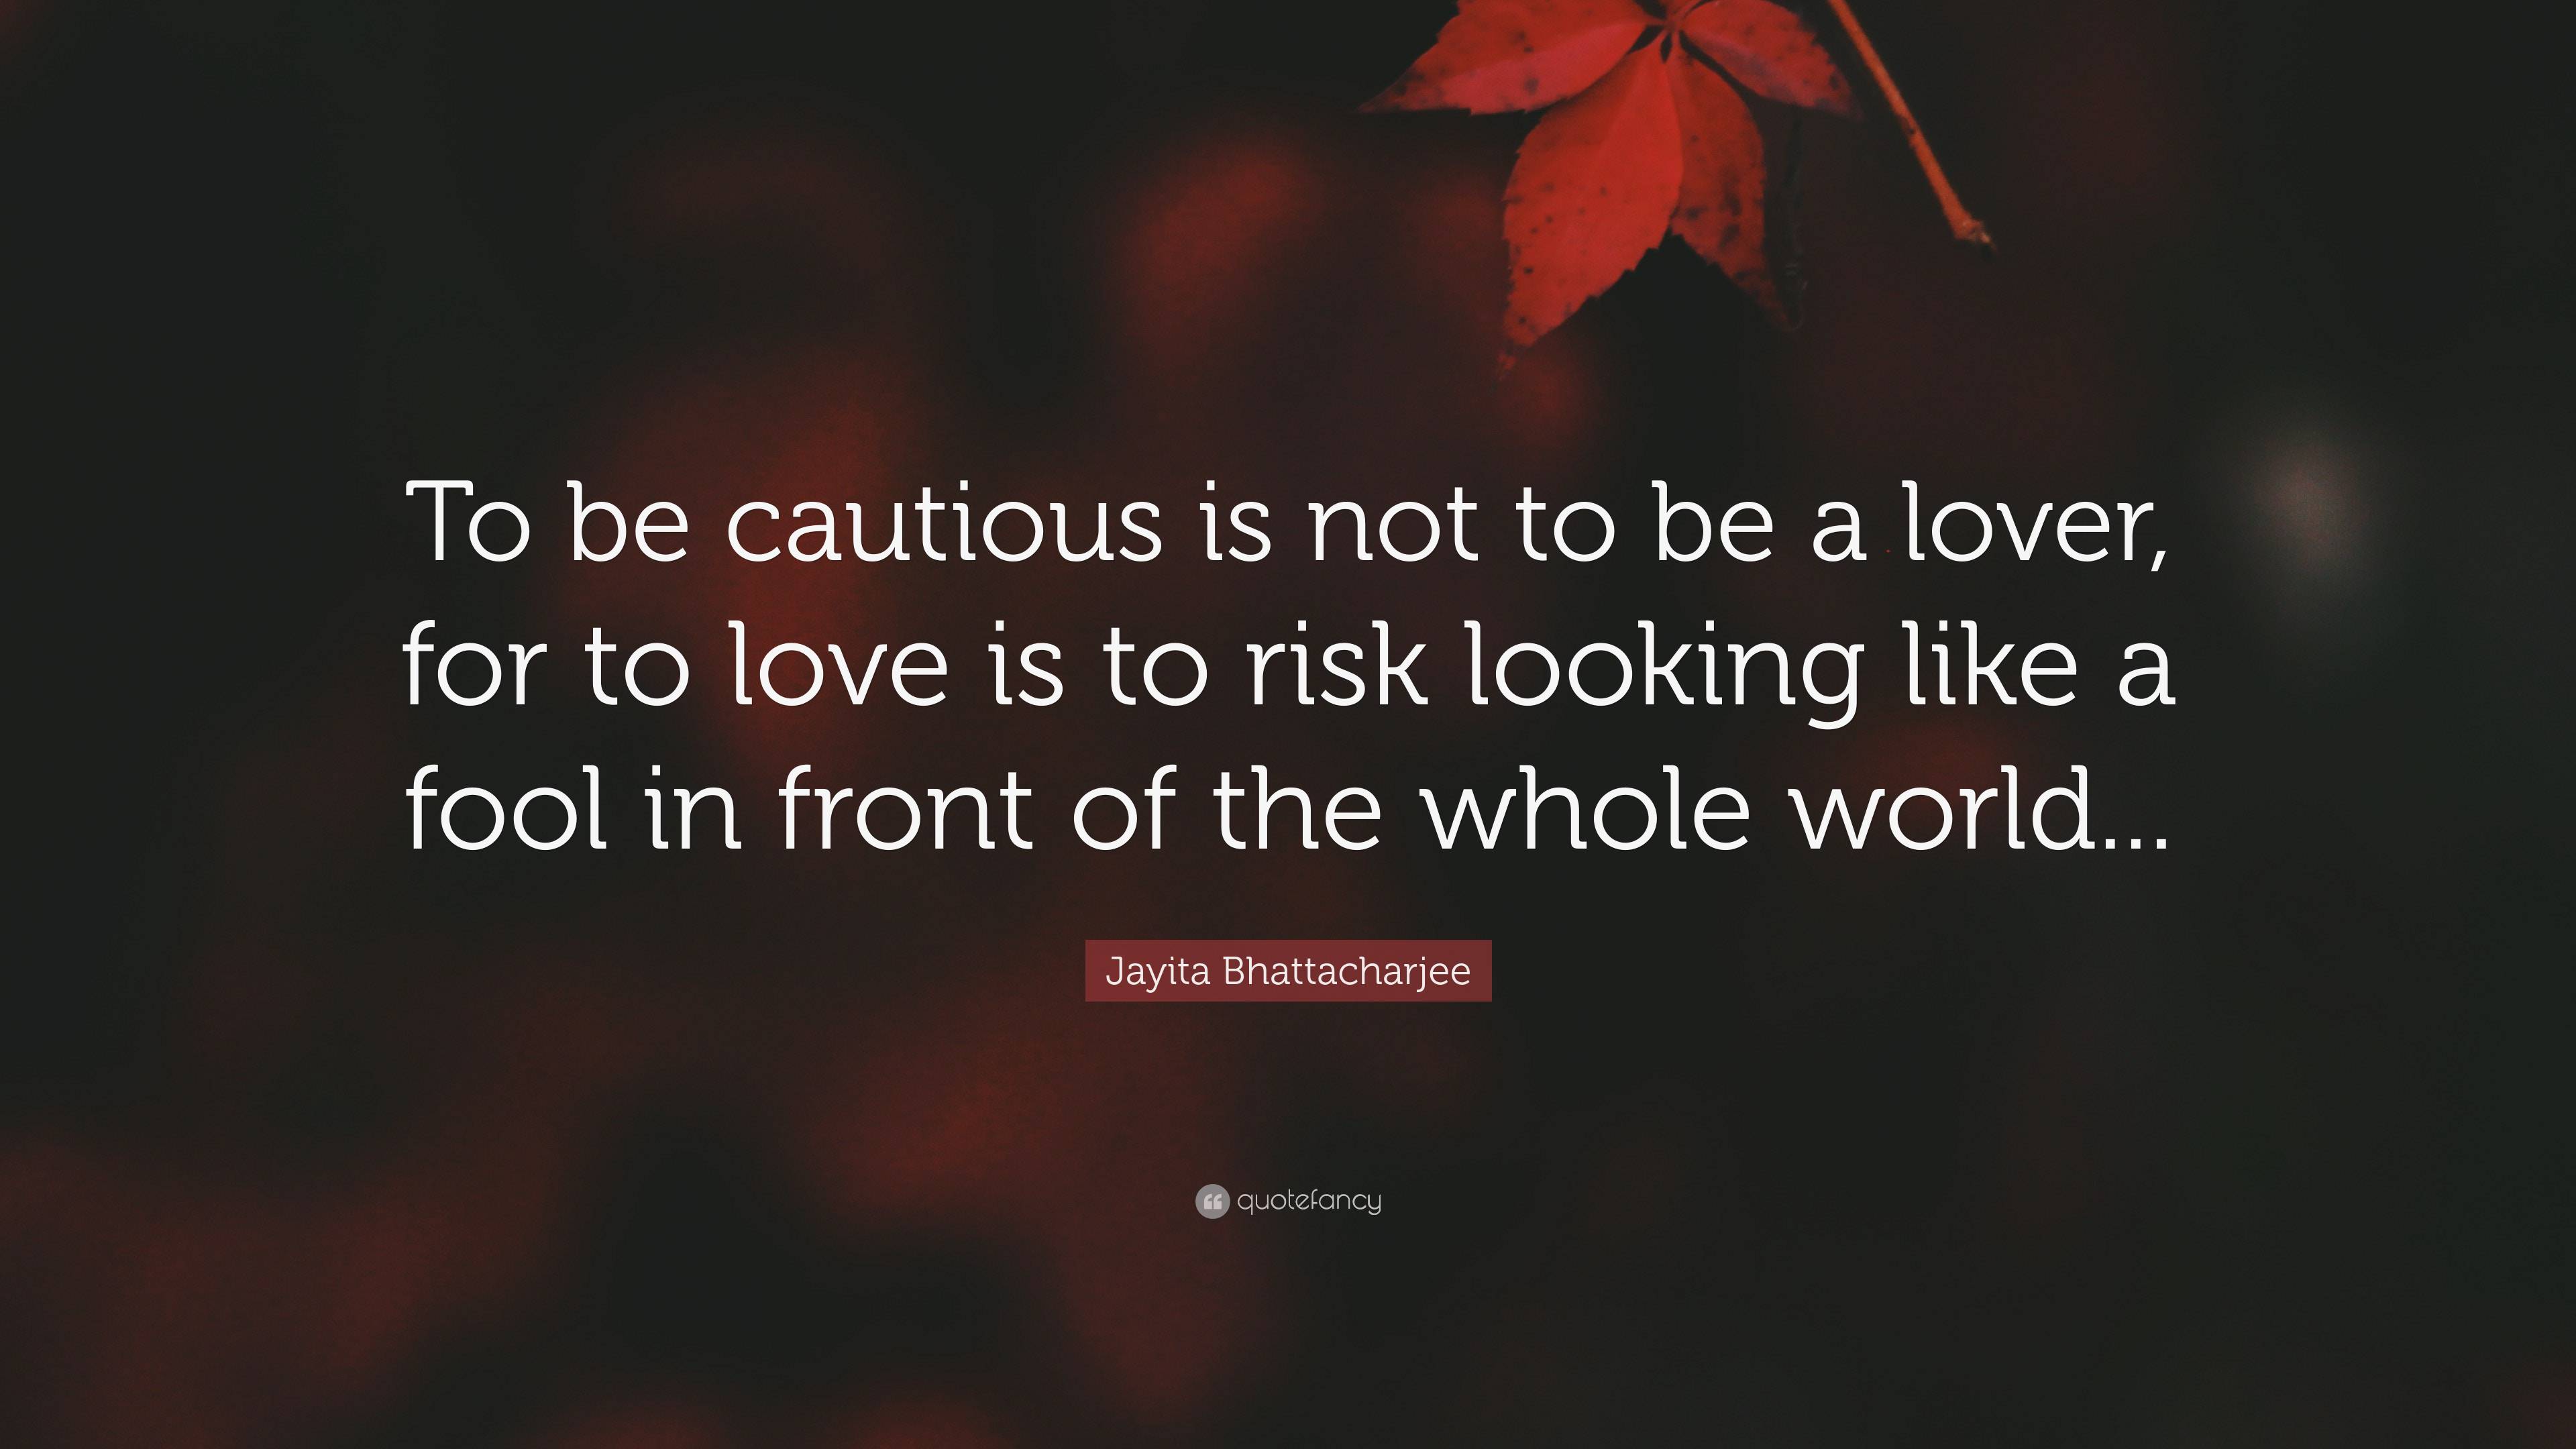 Jayita Bhattacharjee Quote: “To be cautious is not to be a lover, for ...